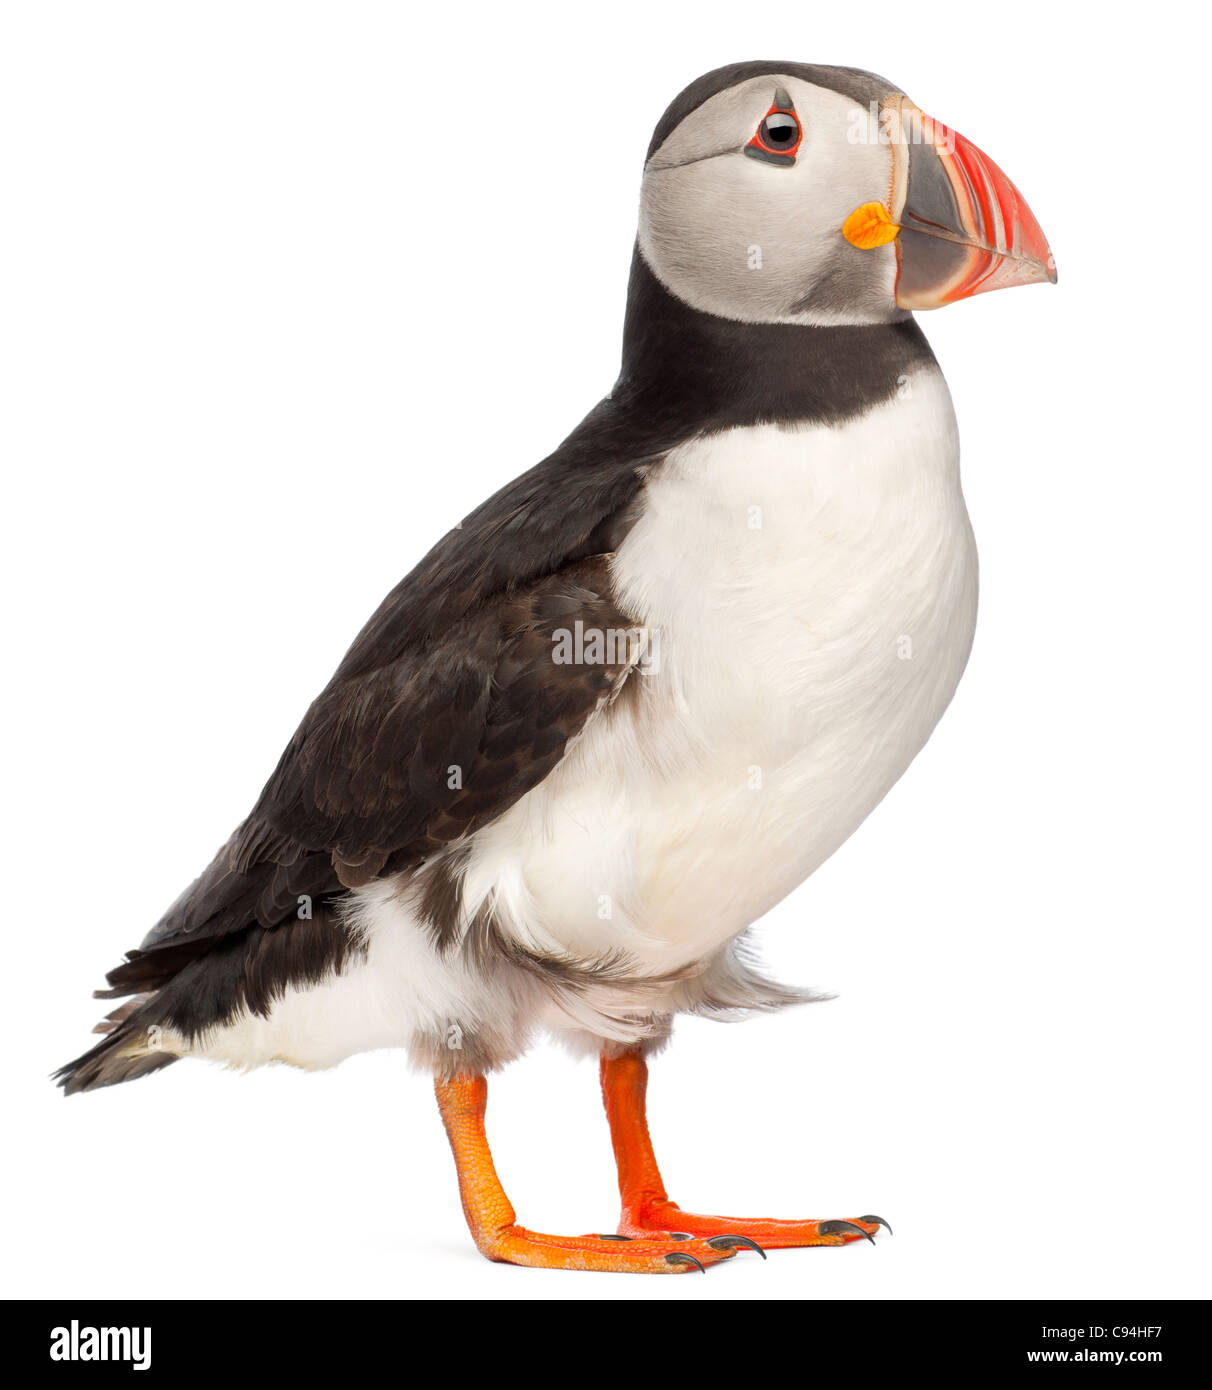 Atlantic Puffin or Common Puffin, Fratercula arctica, in front of white background Stock Photo